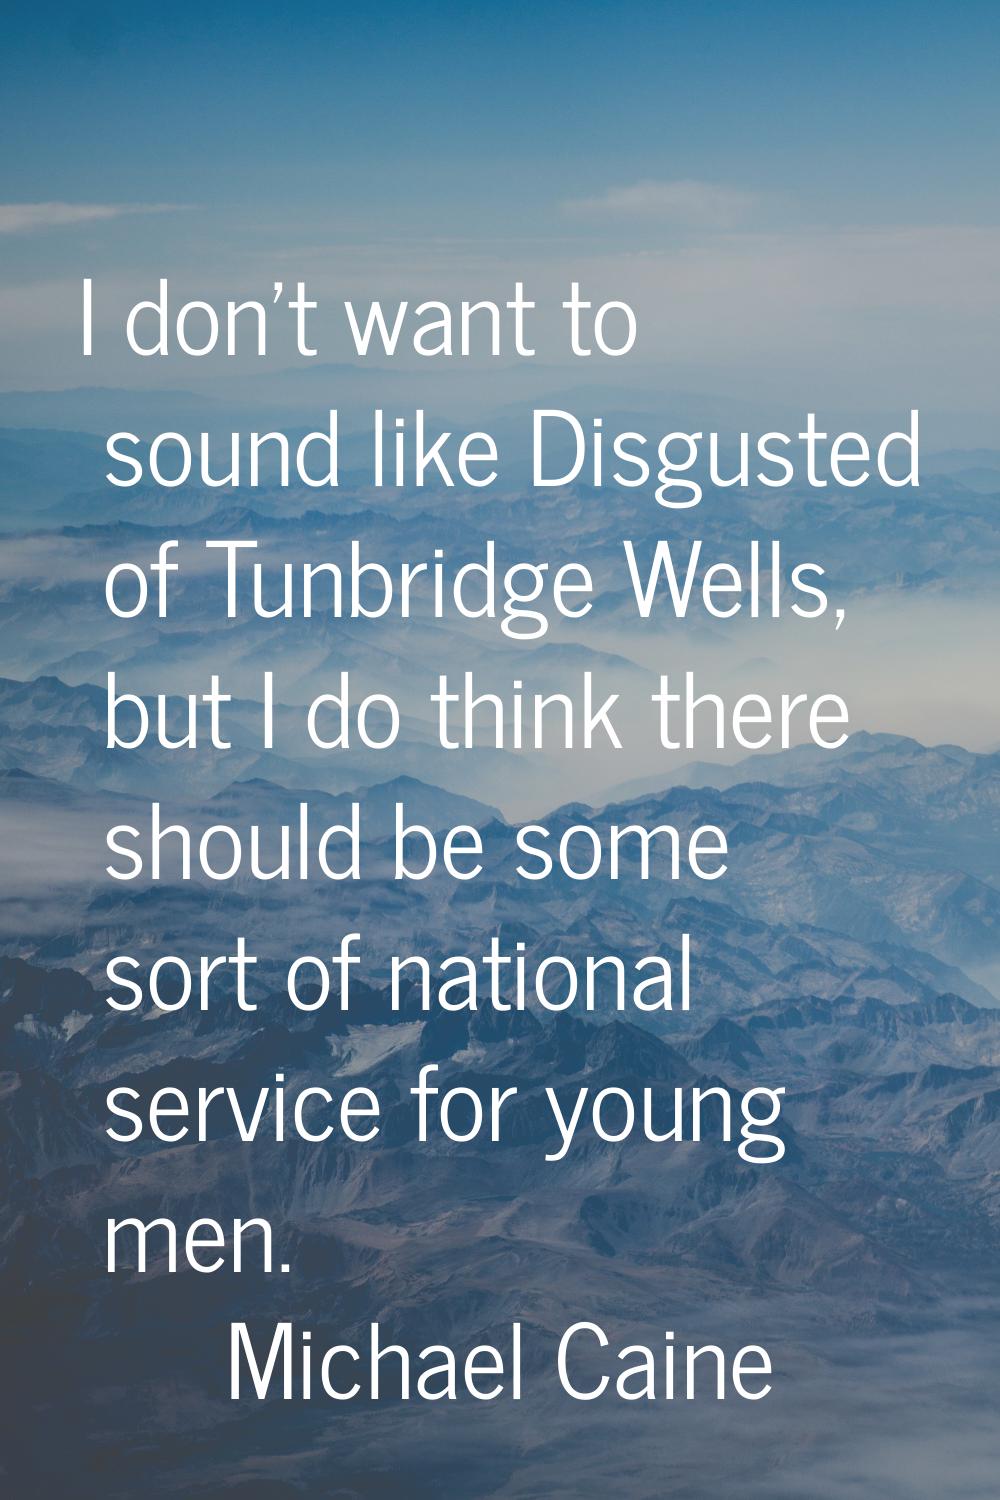 I don't want to sound like Disgusted of Tunbridge Wells, but I do think there should be some sort o